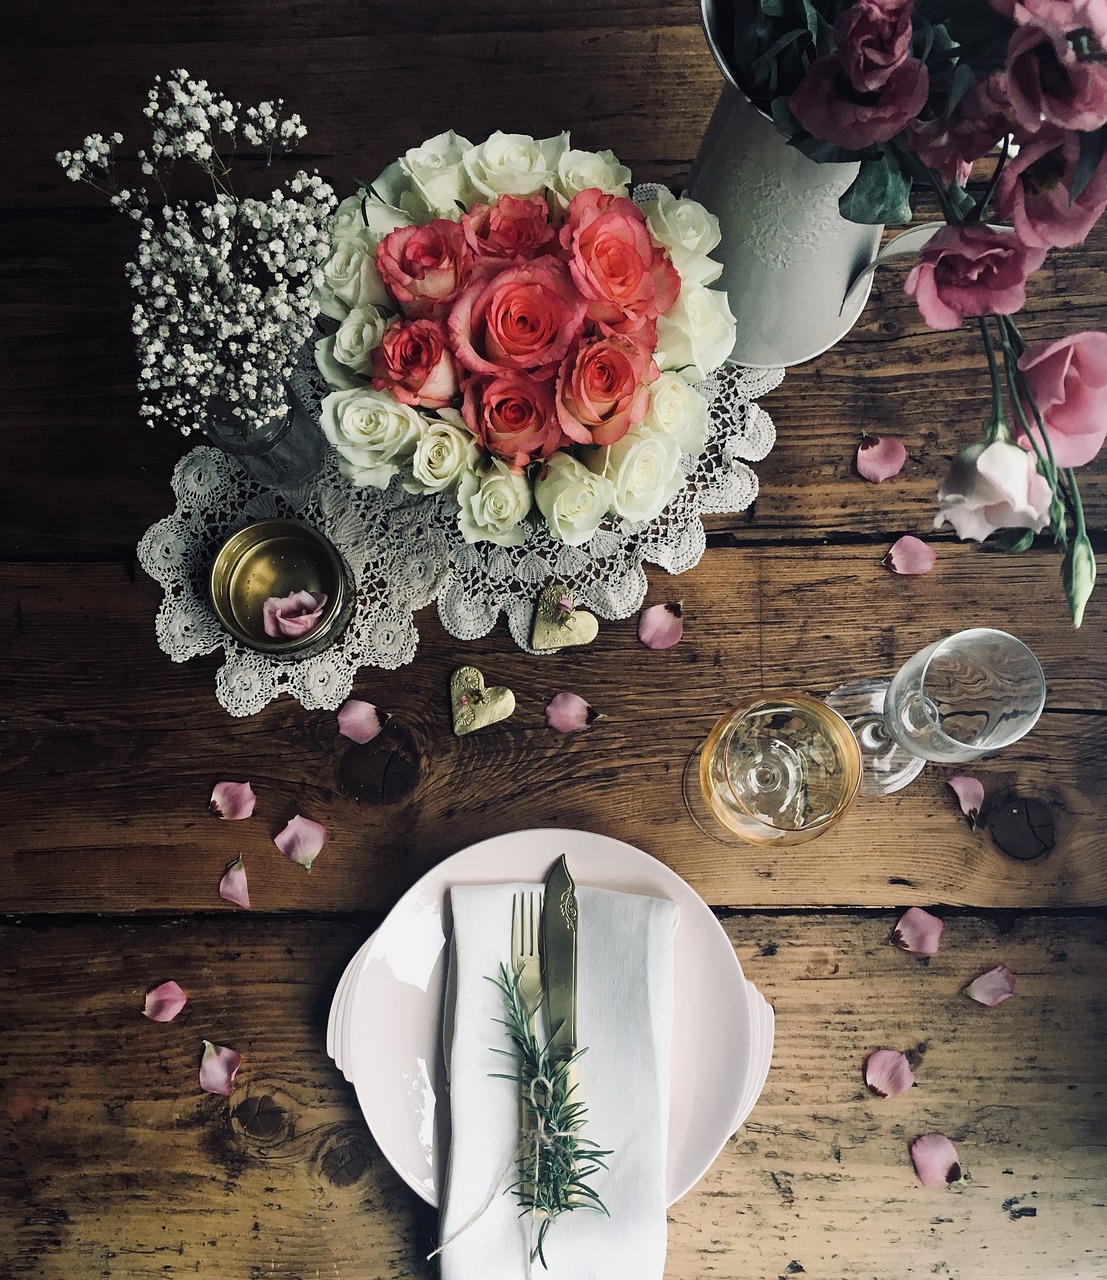 floral place setting  wedding  roses free photo